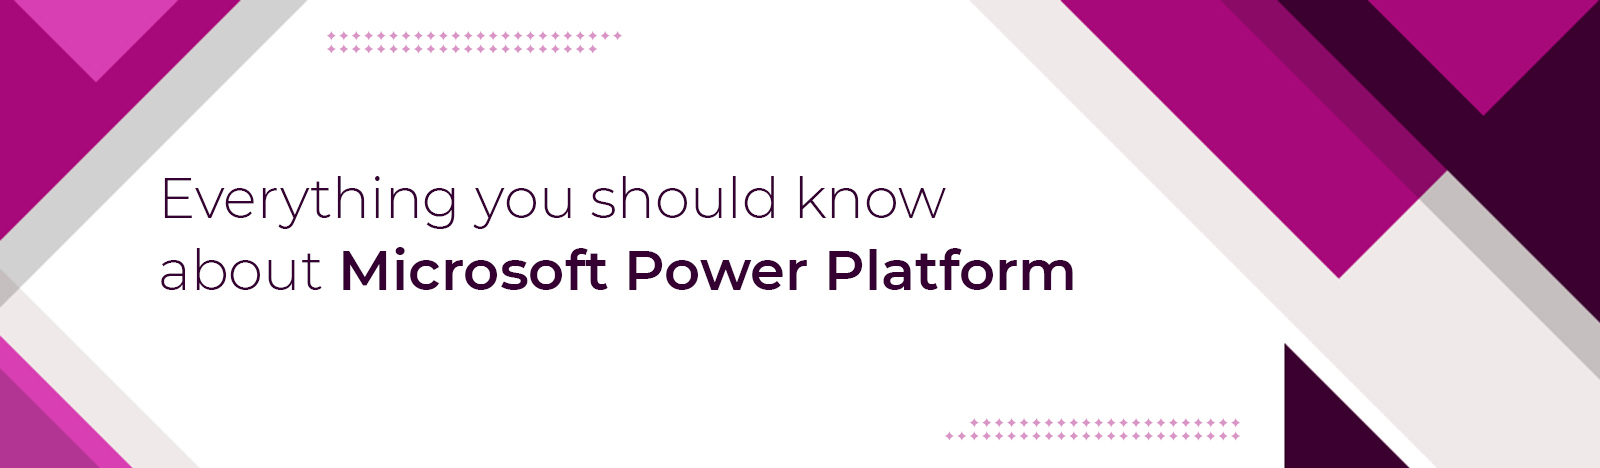 Everything you should know about Microsoft Power Platform in 2021